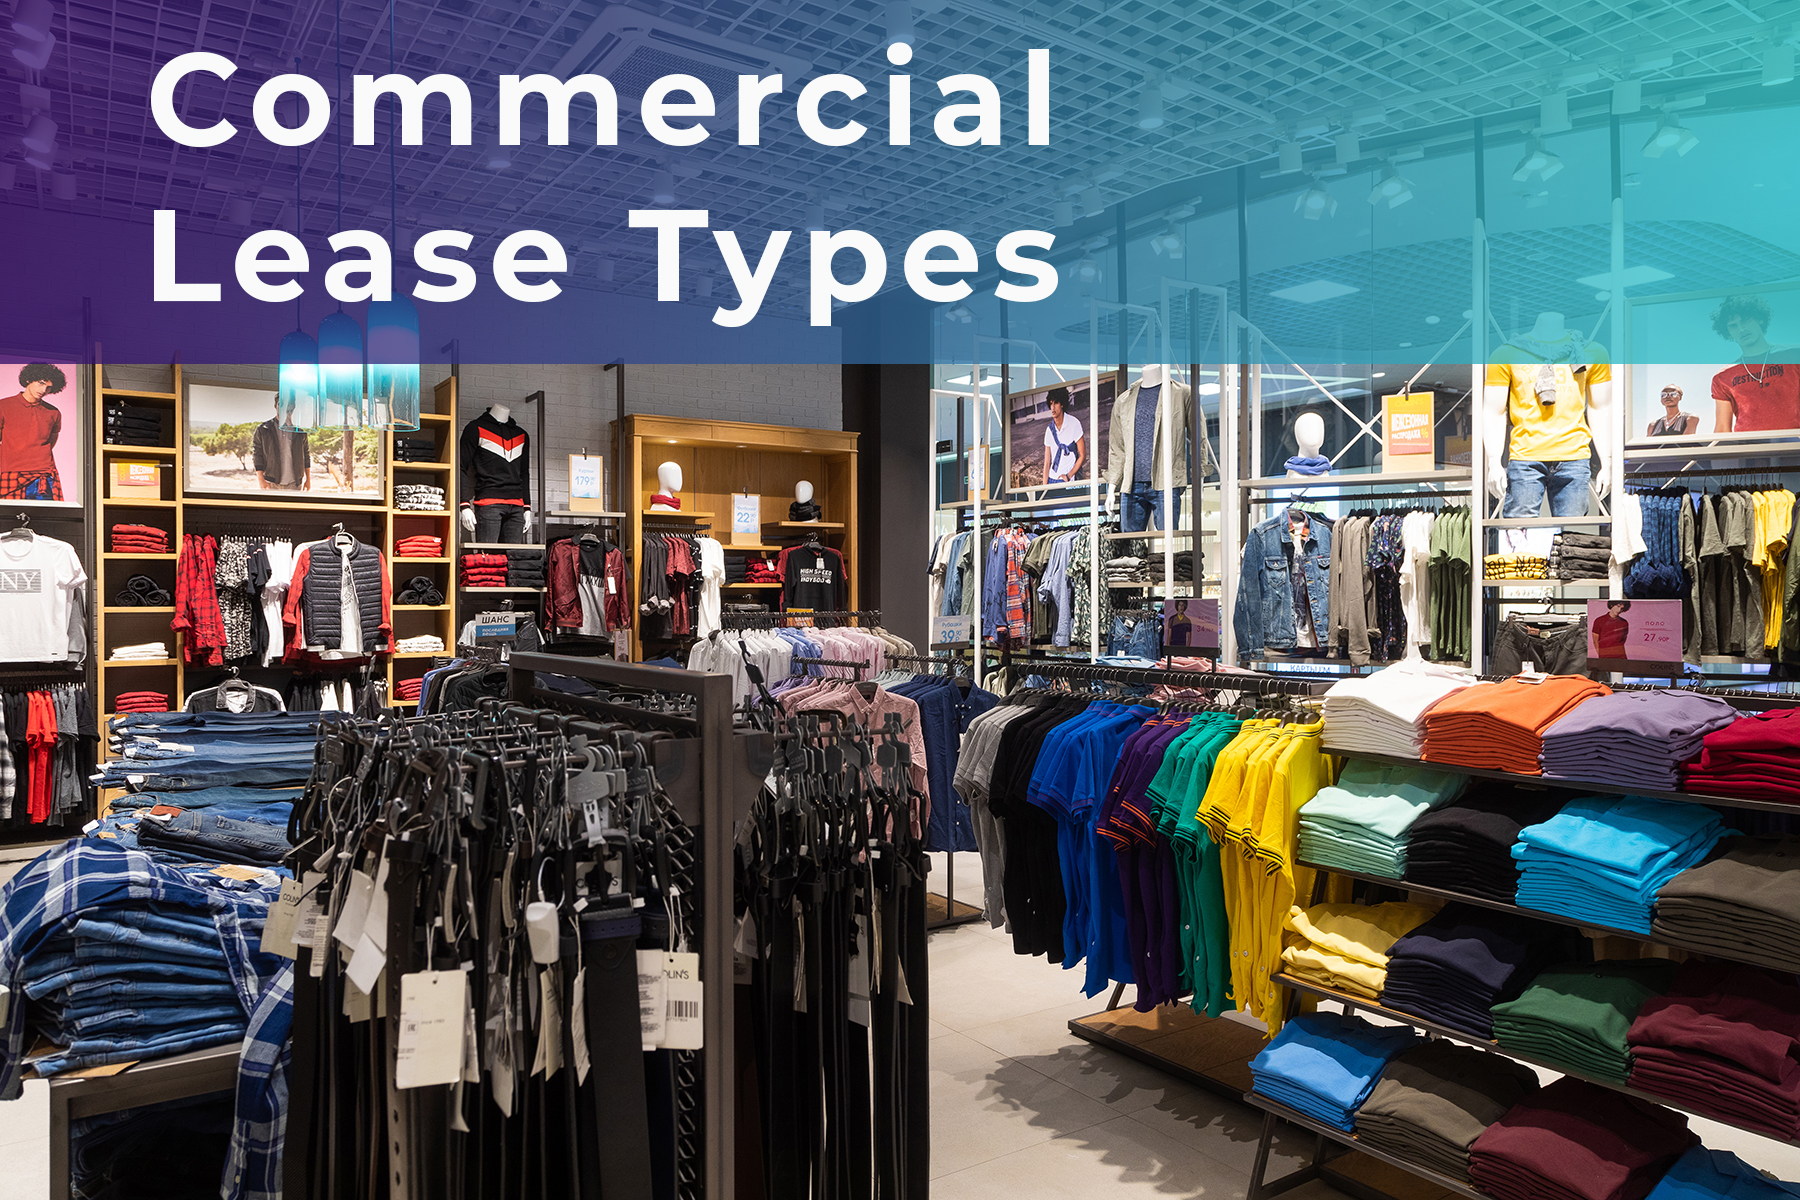 COMMERCIAL LEASE TYPES